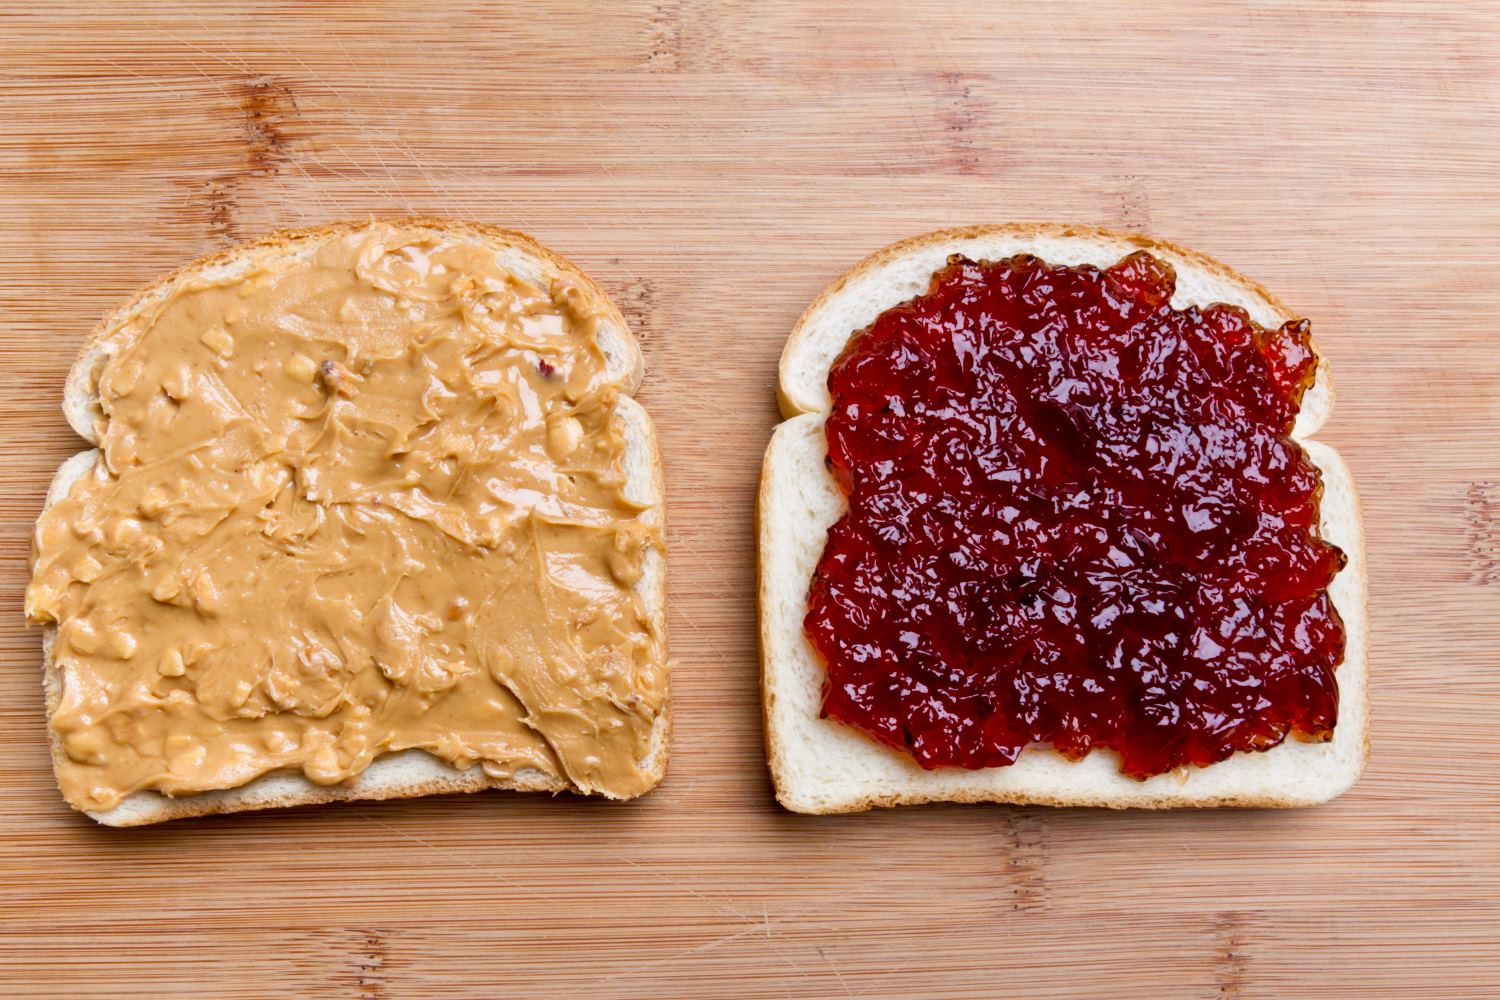 9-facts-about-national-peanut-butter-and-jelly-day-april-2nd